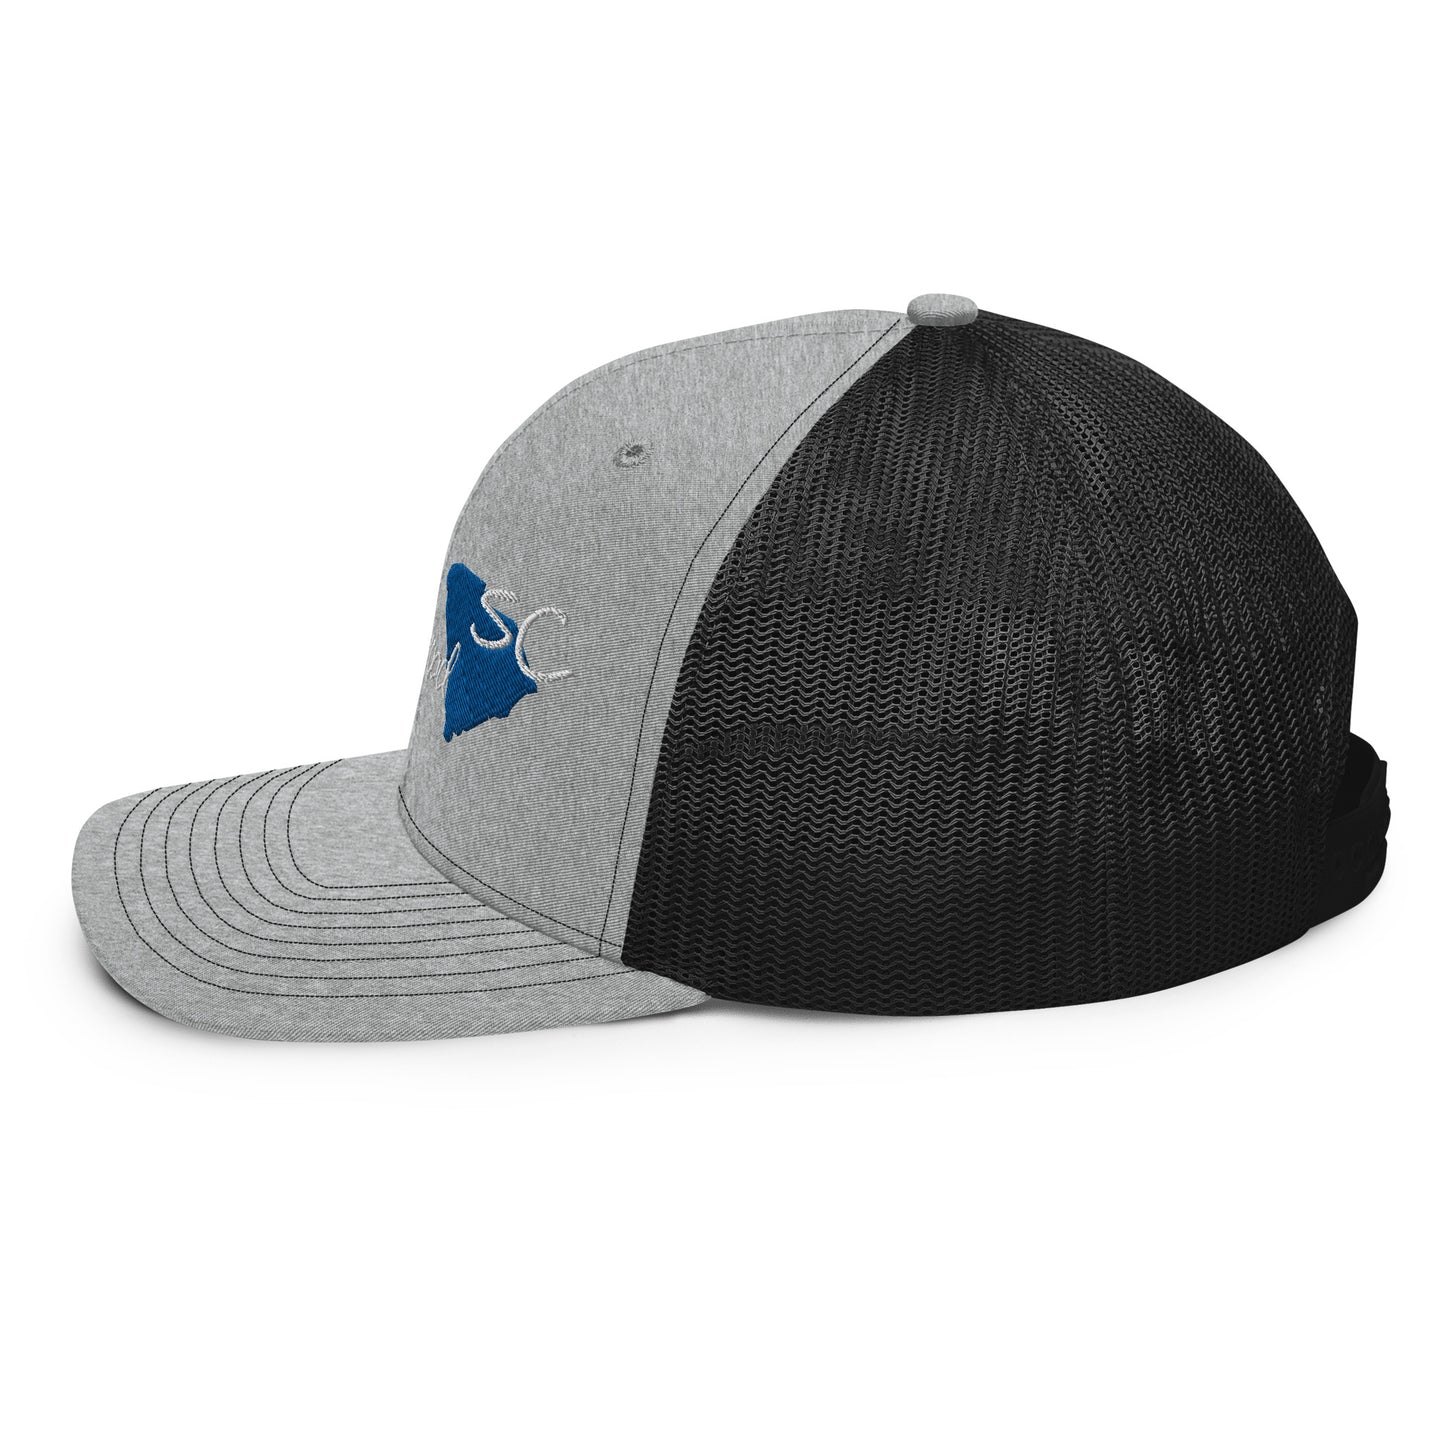 a black and grey hat with a blue star on it